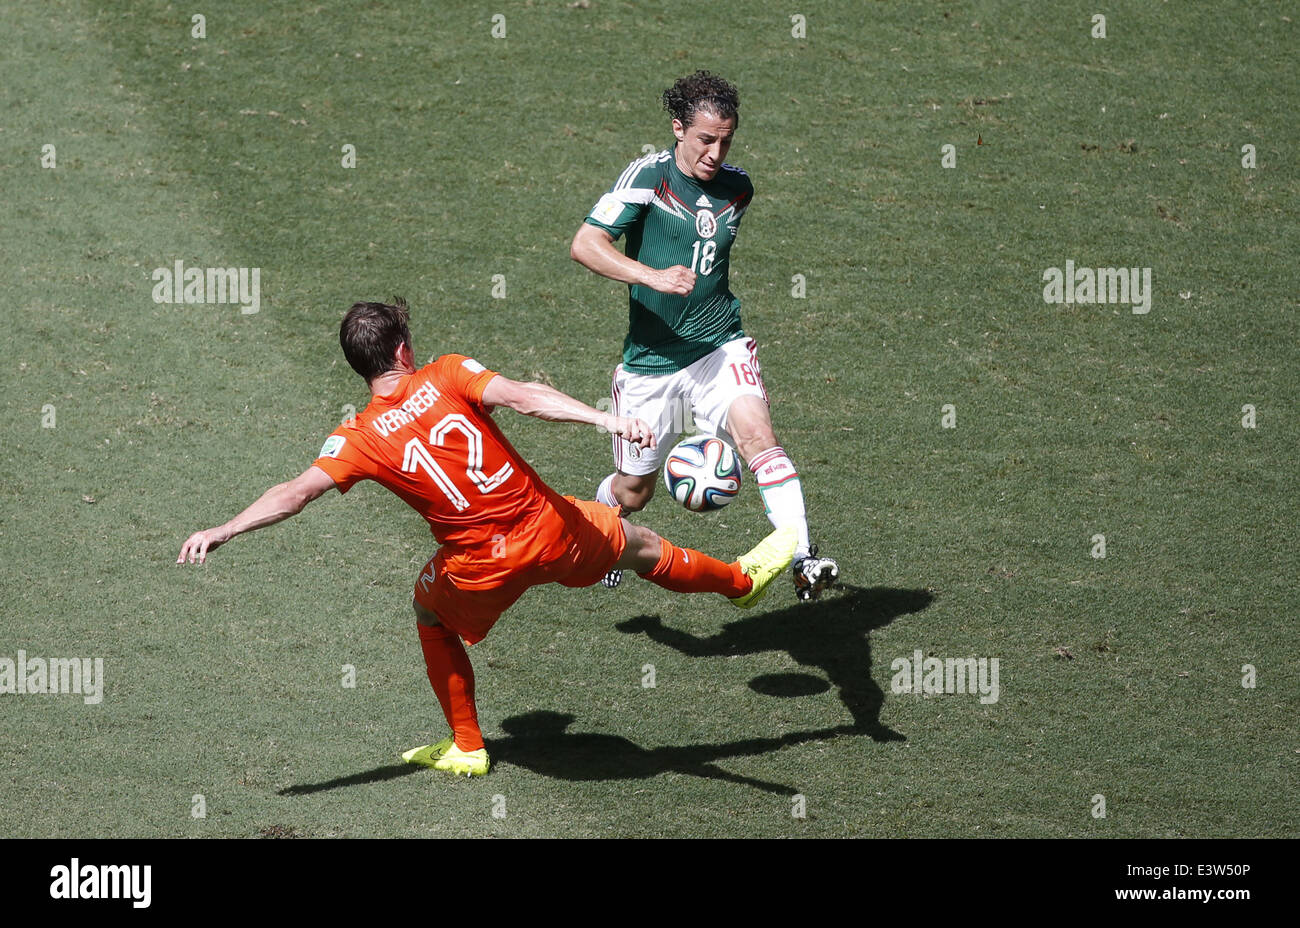 Fortaleza, Brazil. 29th June, 2014. Mexico's Andres Guardado (R) vies with Netherlands' Paul Verhaegh during a Round of 16 match between Netherlands and Mexico of 2014 FIFA World Cup at the Estadio Castelao Stadium in Fortaleza, Brazil, on June 29, 2014. Credit:  Liao Yujie/Xinhua/Alamy Live News Stock Photo